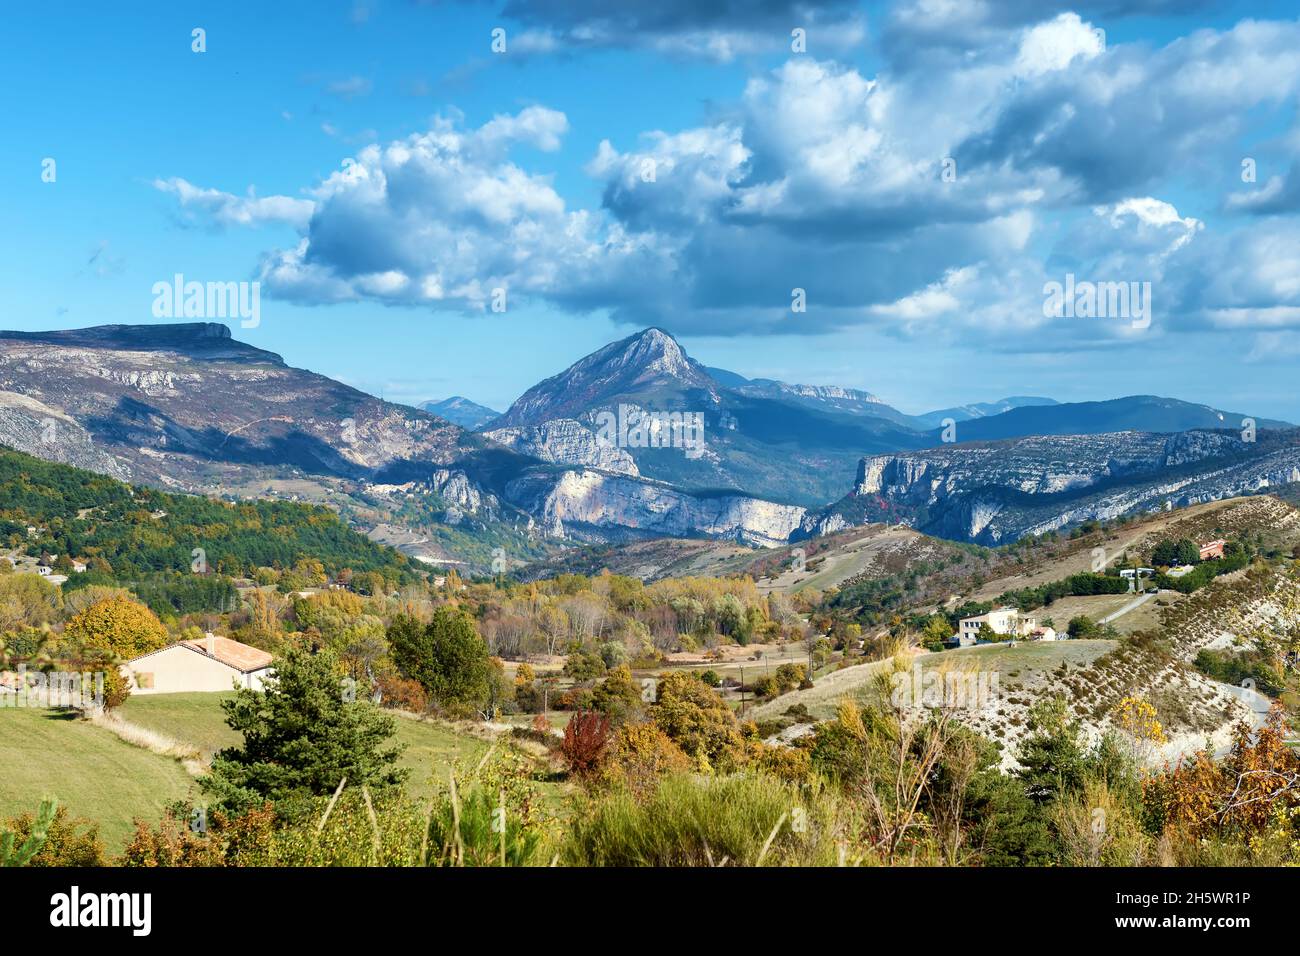 'Robion' Mountain, located near Castellane, in the French department of the Alpes-de-Haute-Provence in the region of Provence-Alpes-Côte d'Azur. Stock Photo